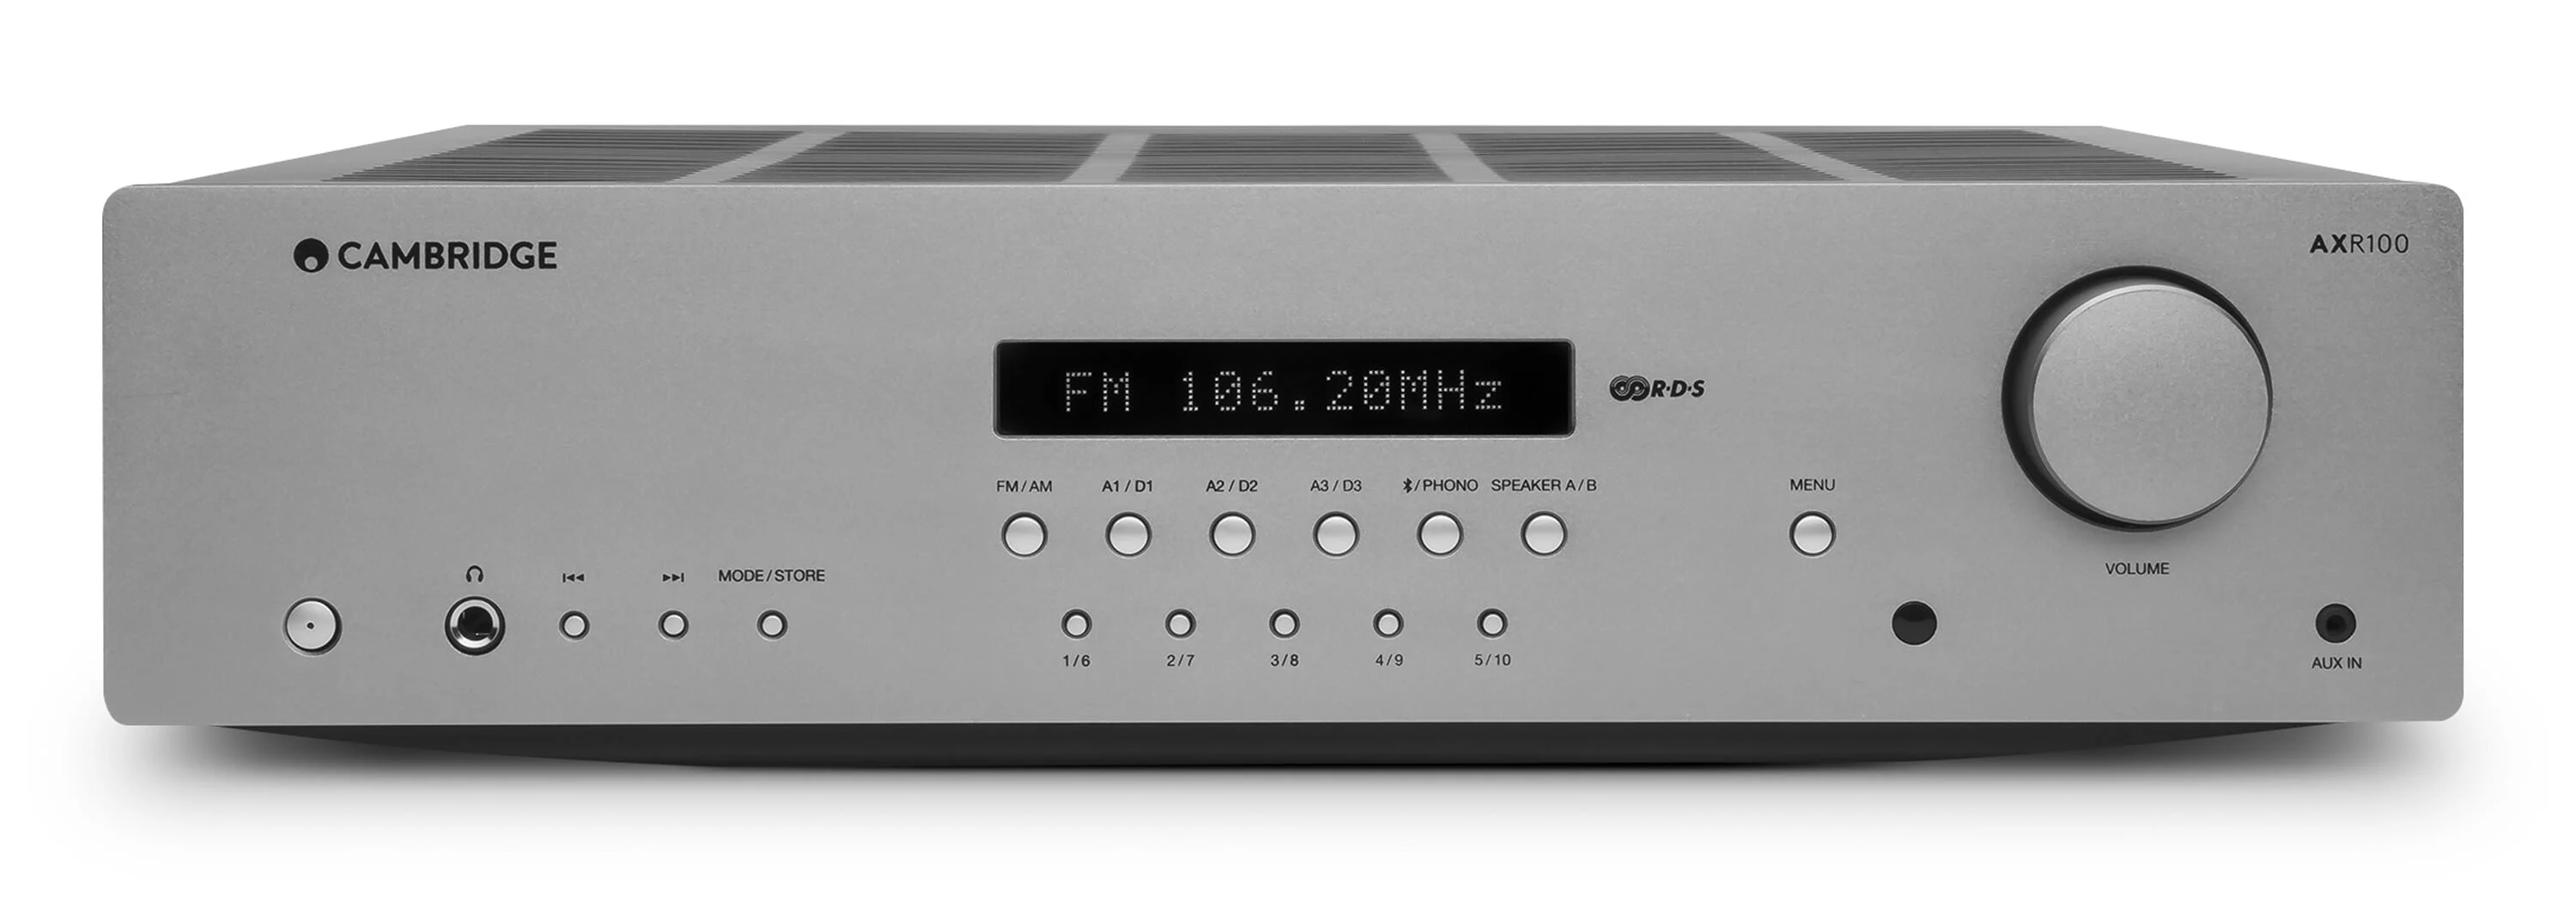 Cambridge AXR100 Stereo Receiver from Music Direct.